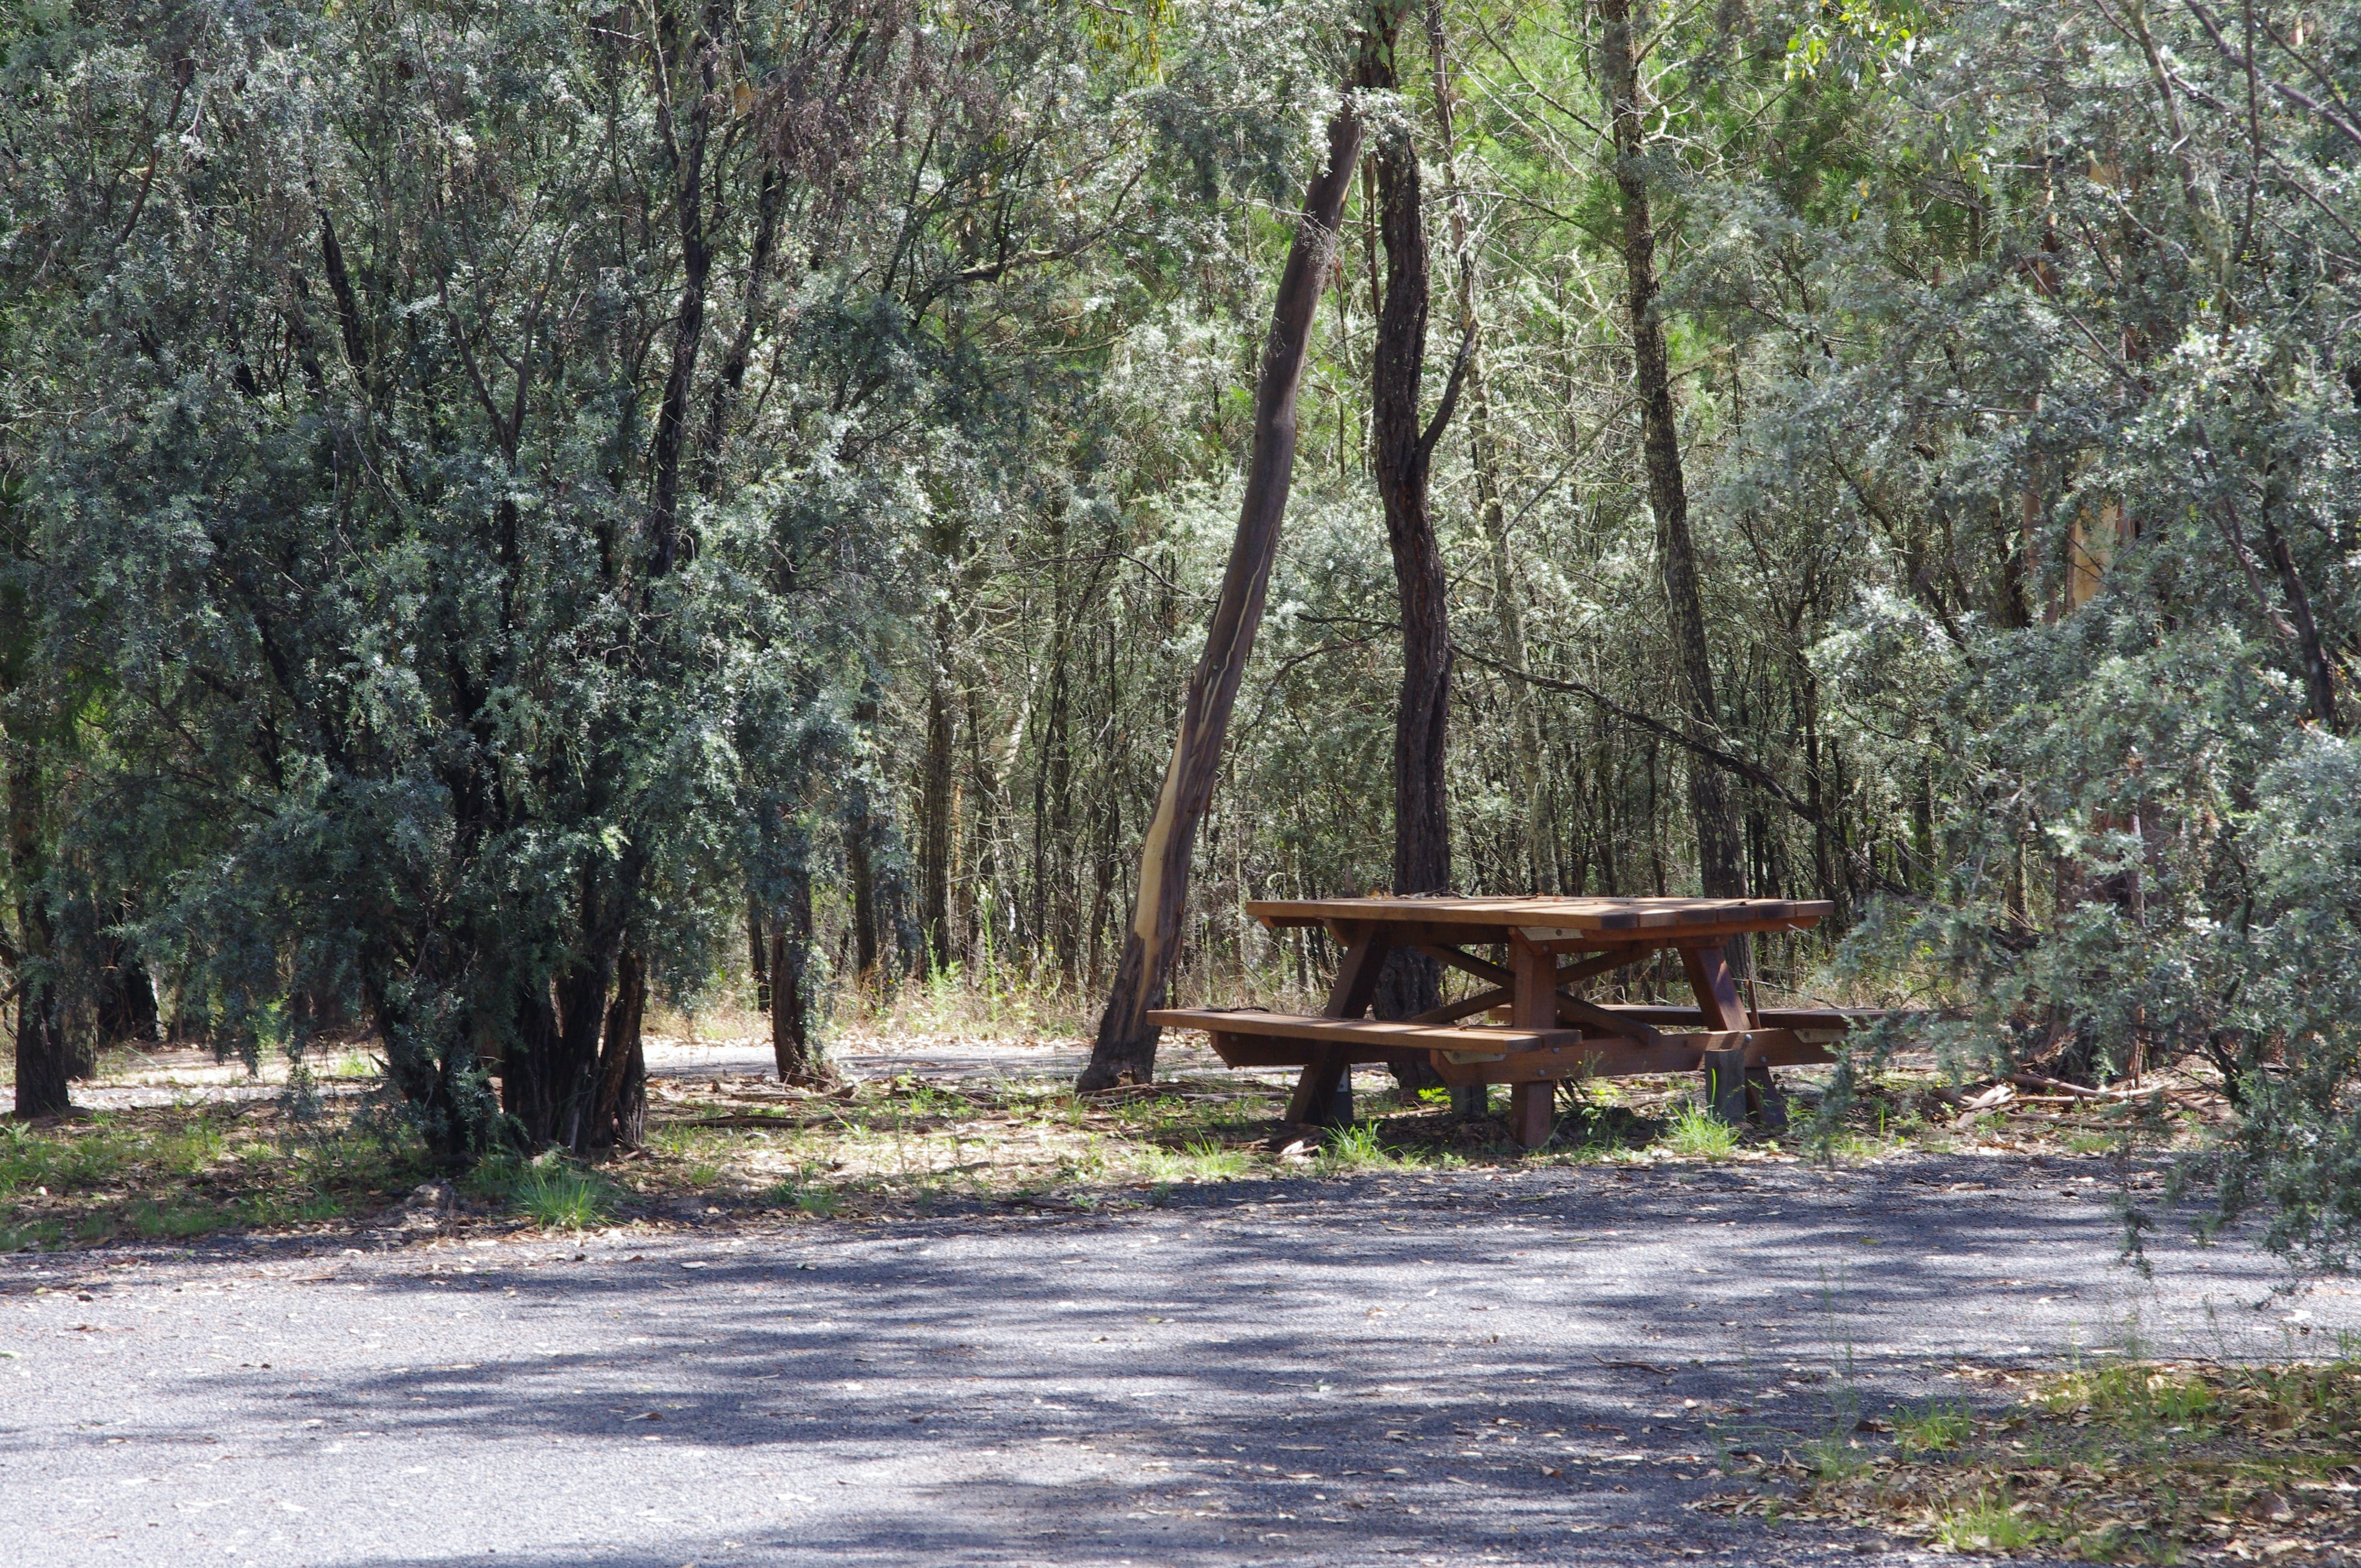 Goonoowigall State Conservation Area - Redcliffe Tourism